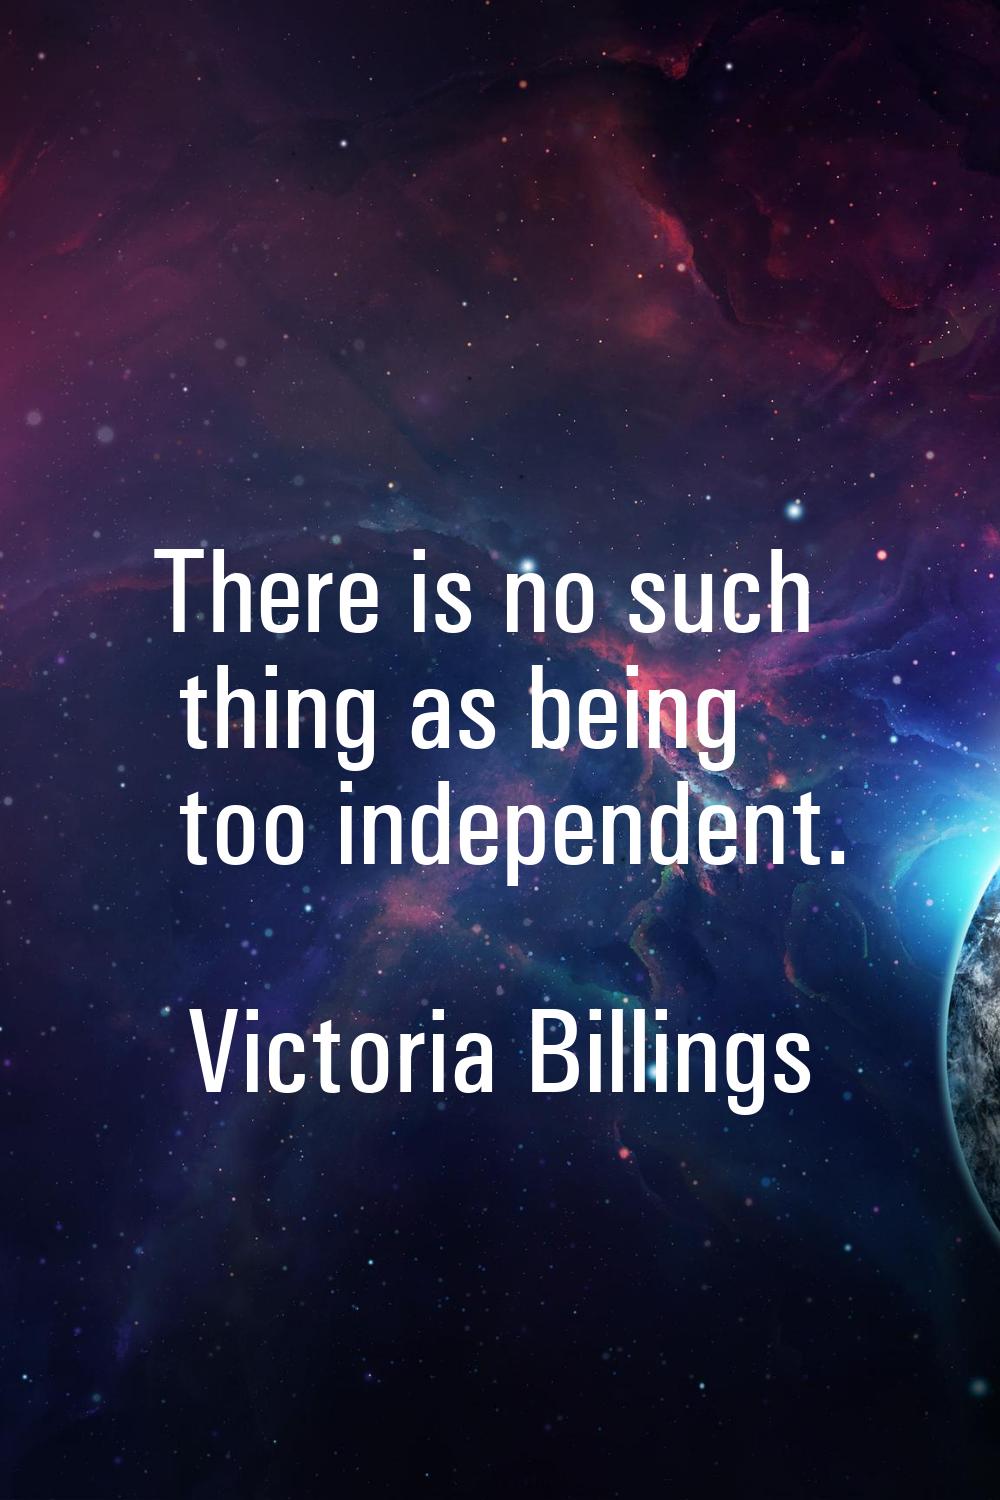 There is no such thing as being too independent.